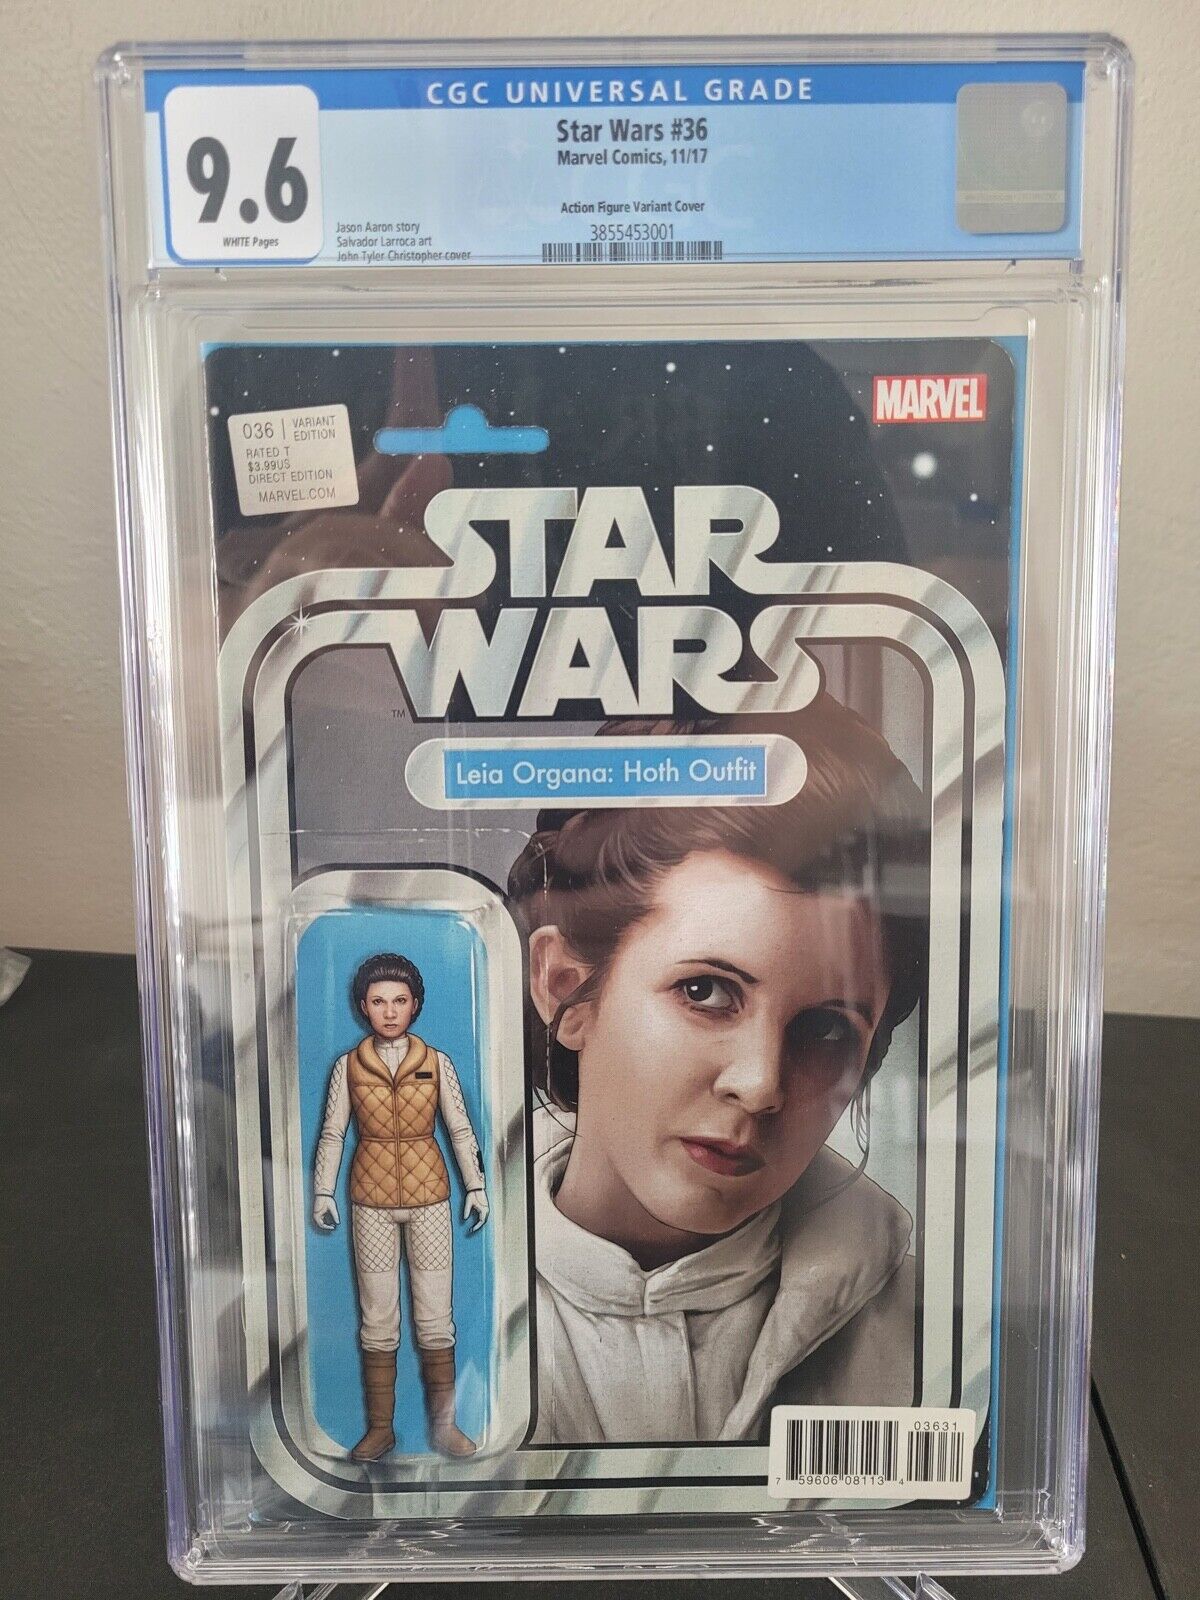 STAR WARS #36 CGC 9.6 GRADED 2017 PRINCESS LEIA ACTION FIGURE VARIANT COVER